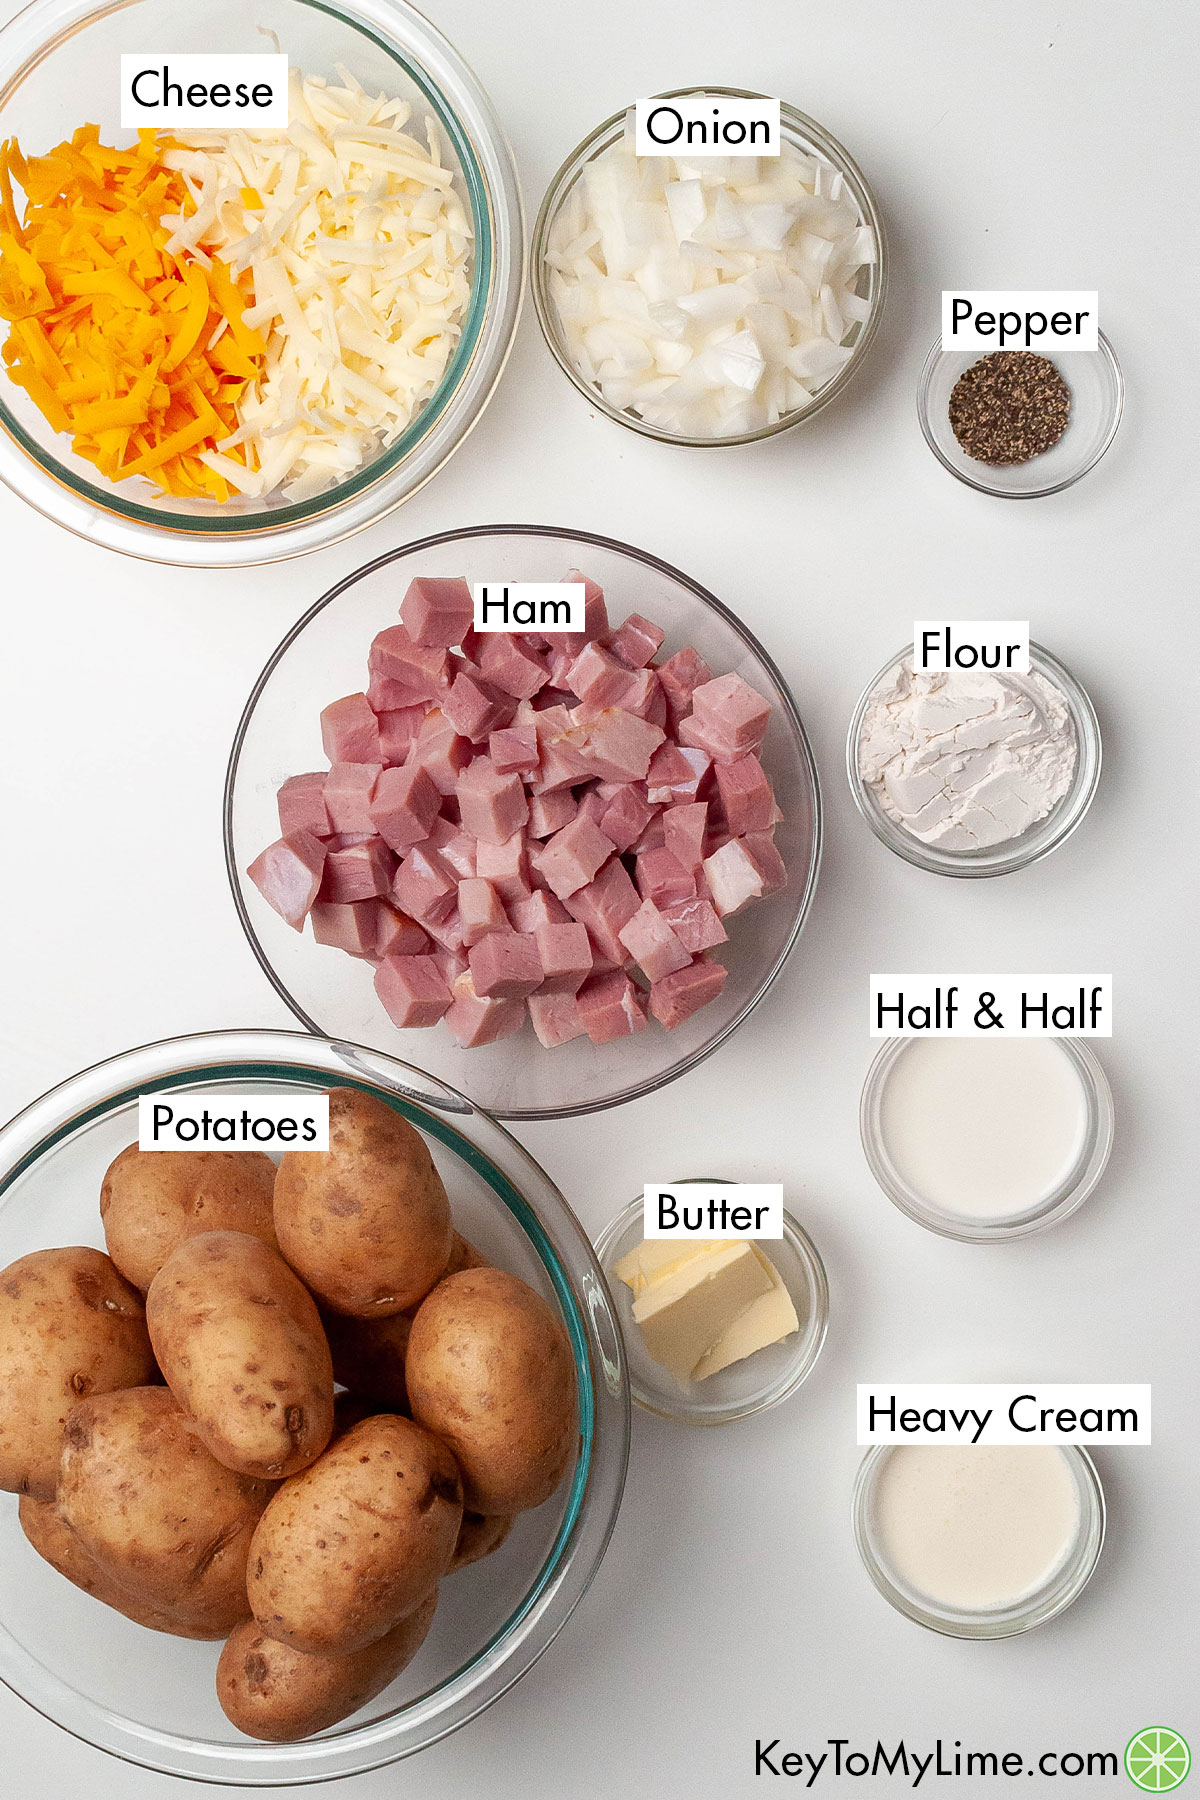 The labeled ingredients for scalloped potatoes and ham.